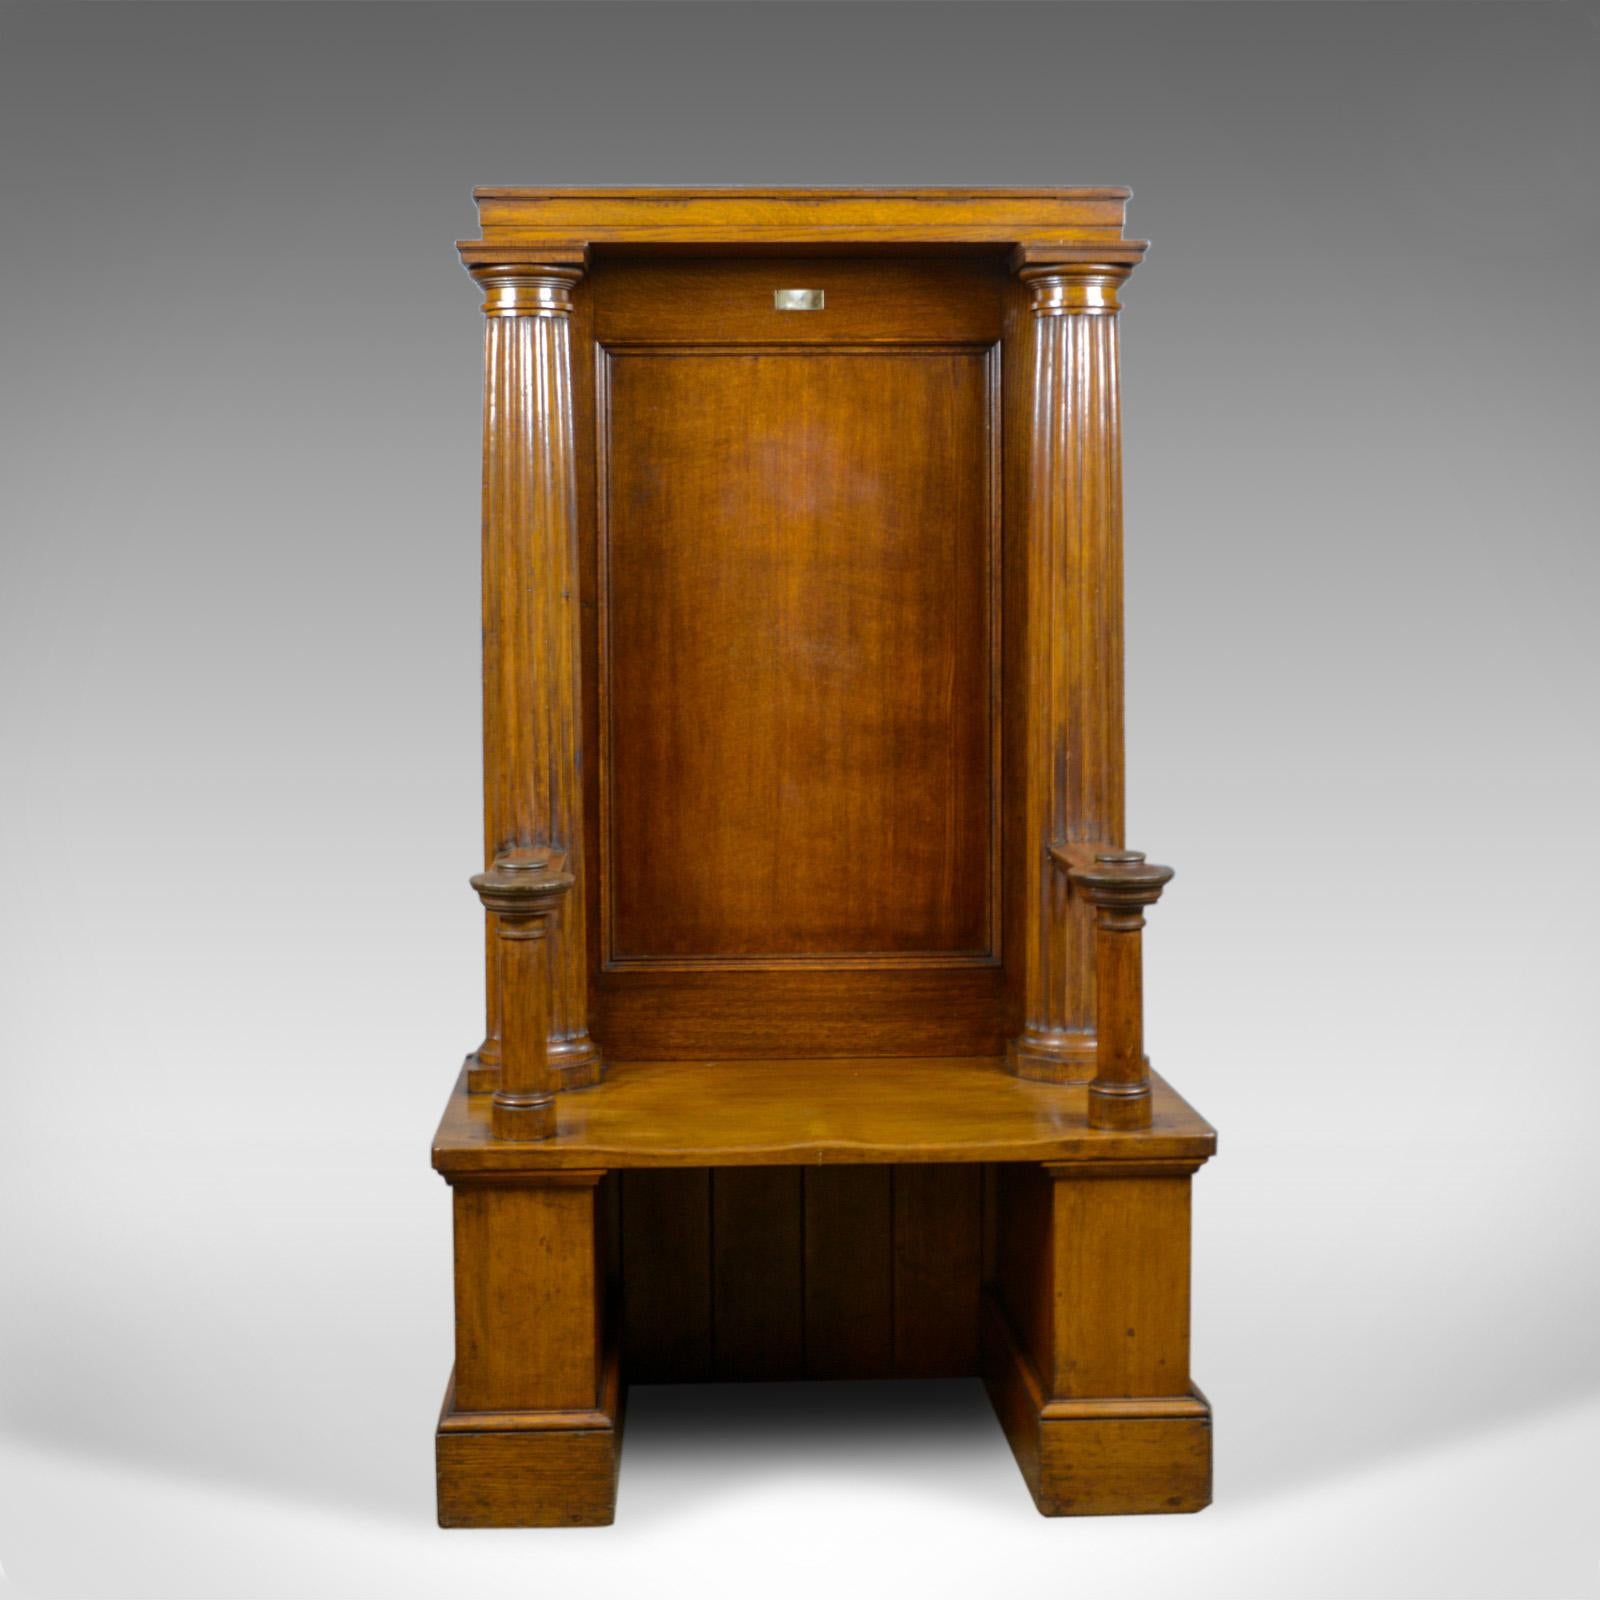 This is a large, antique, oak throne chair. An English, Edwardian bench seat with classical detail and Doric columns dating to the early 20th century, circa 1910.

Of large proportion and magnificent presence
Rich in color with a desirable aged